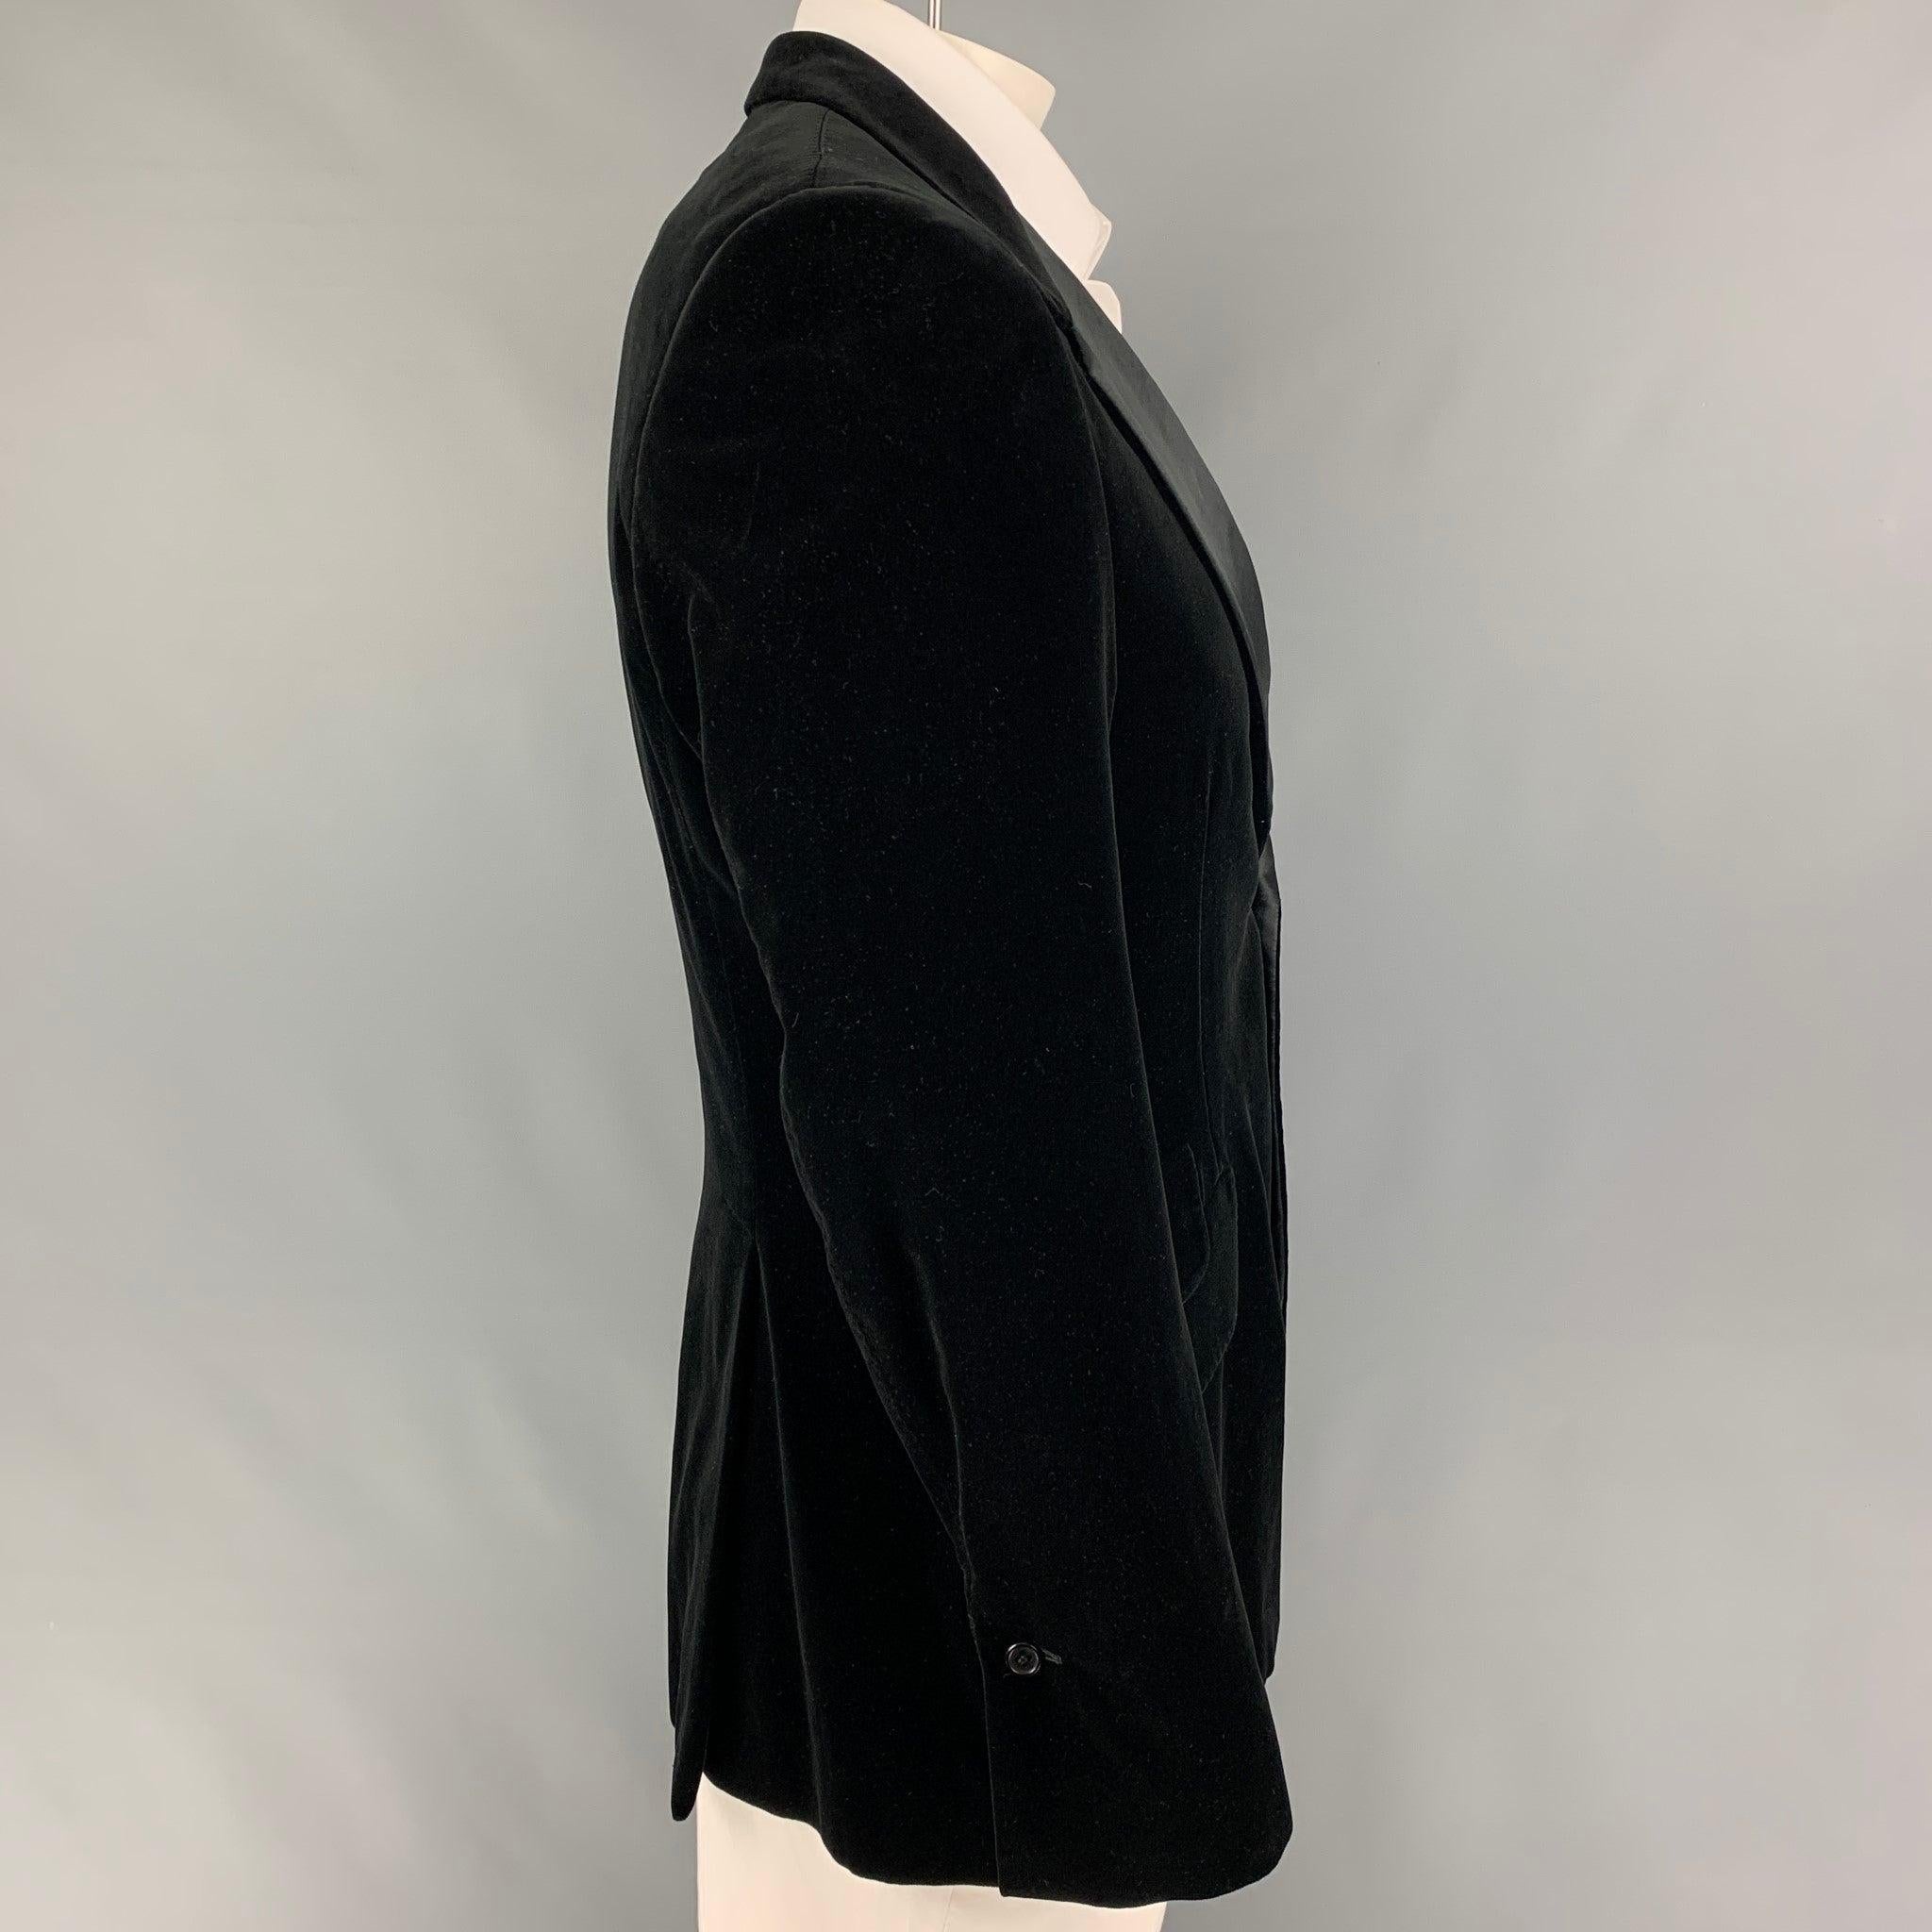 PAUL SMITH sport coat comes in a black cotton velvet with a full liner featuring a notch lapel, flap pockets, double back vent, and a double button closure. Made in Italy.
Very Good
Pre-Owned Condition. 

Marked:   42 

Measurements: 
 
Shoulder: 18